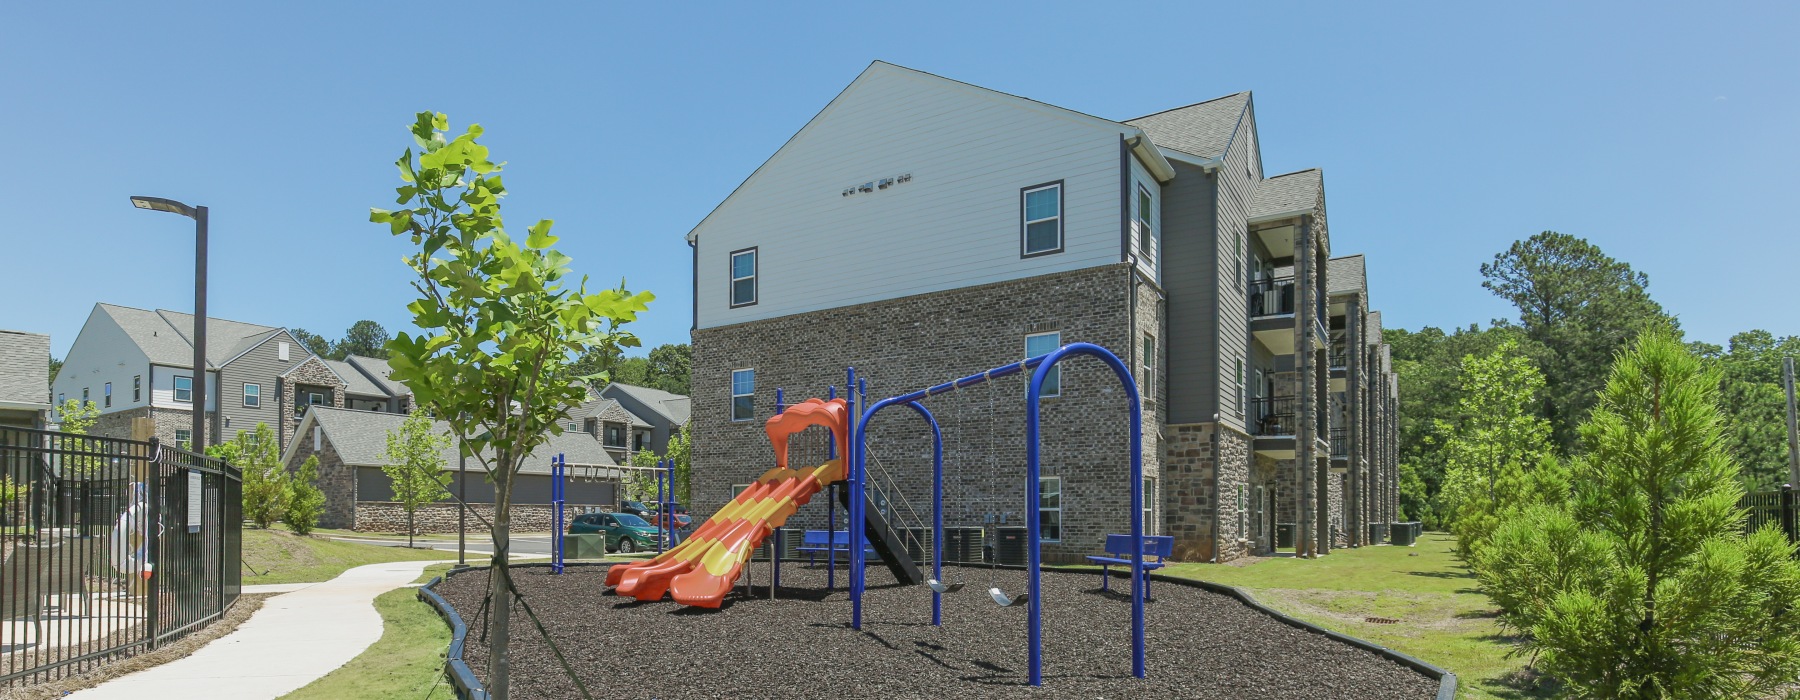 Playground in front of building 